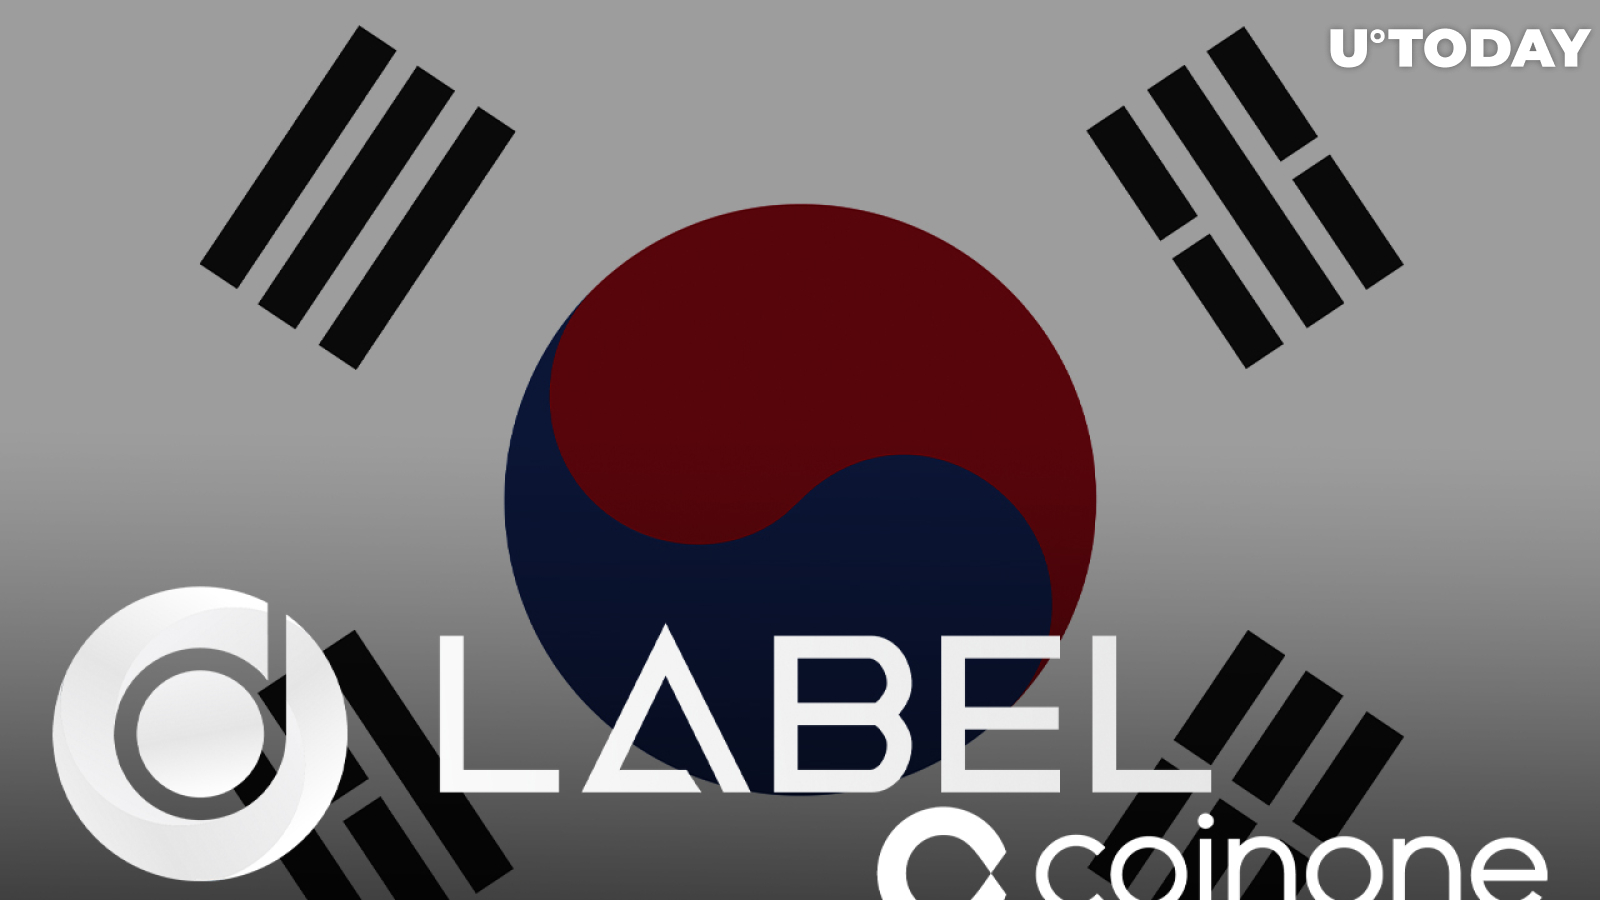 LABEL Foundation Debuts on South Korean Major Exchange Coinone: Details